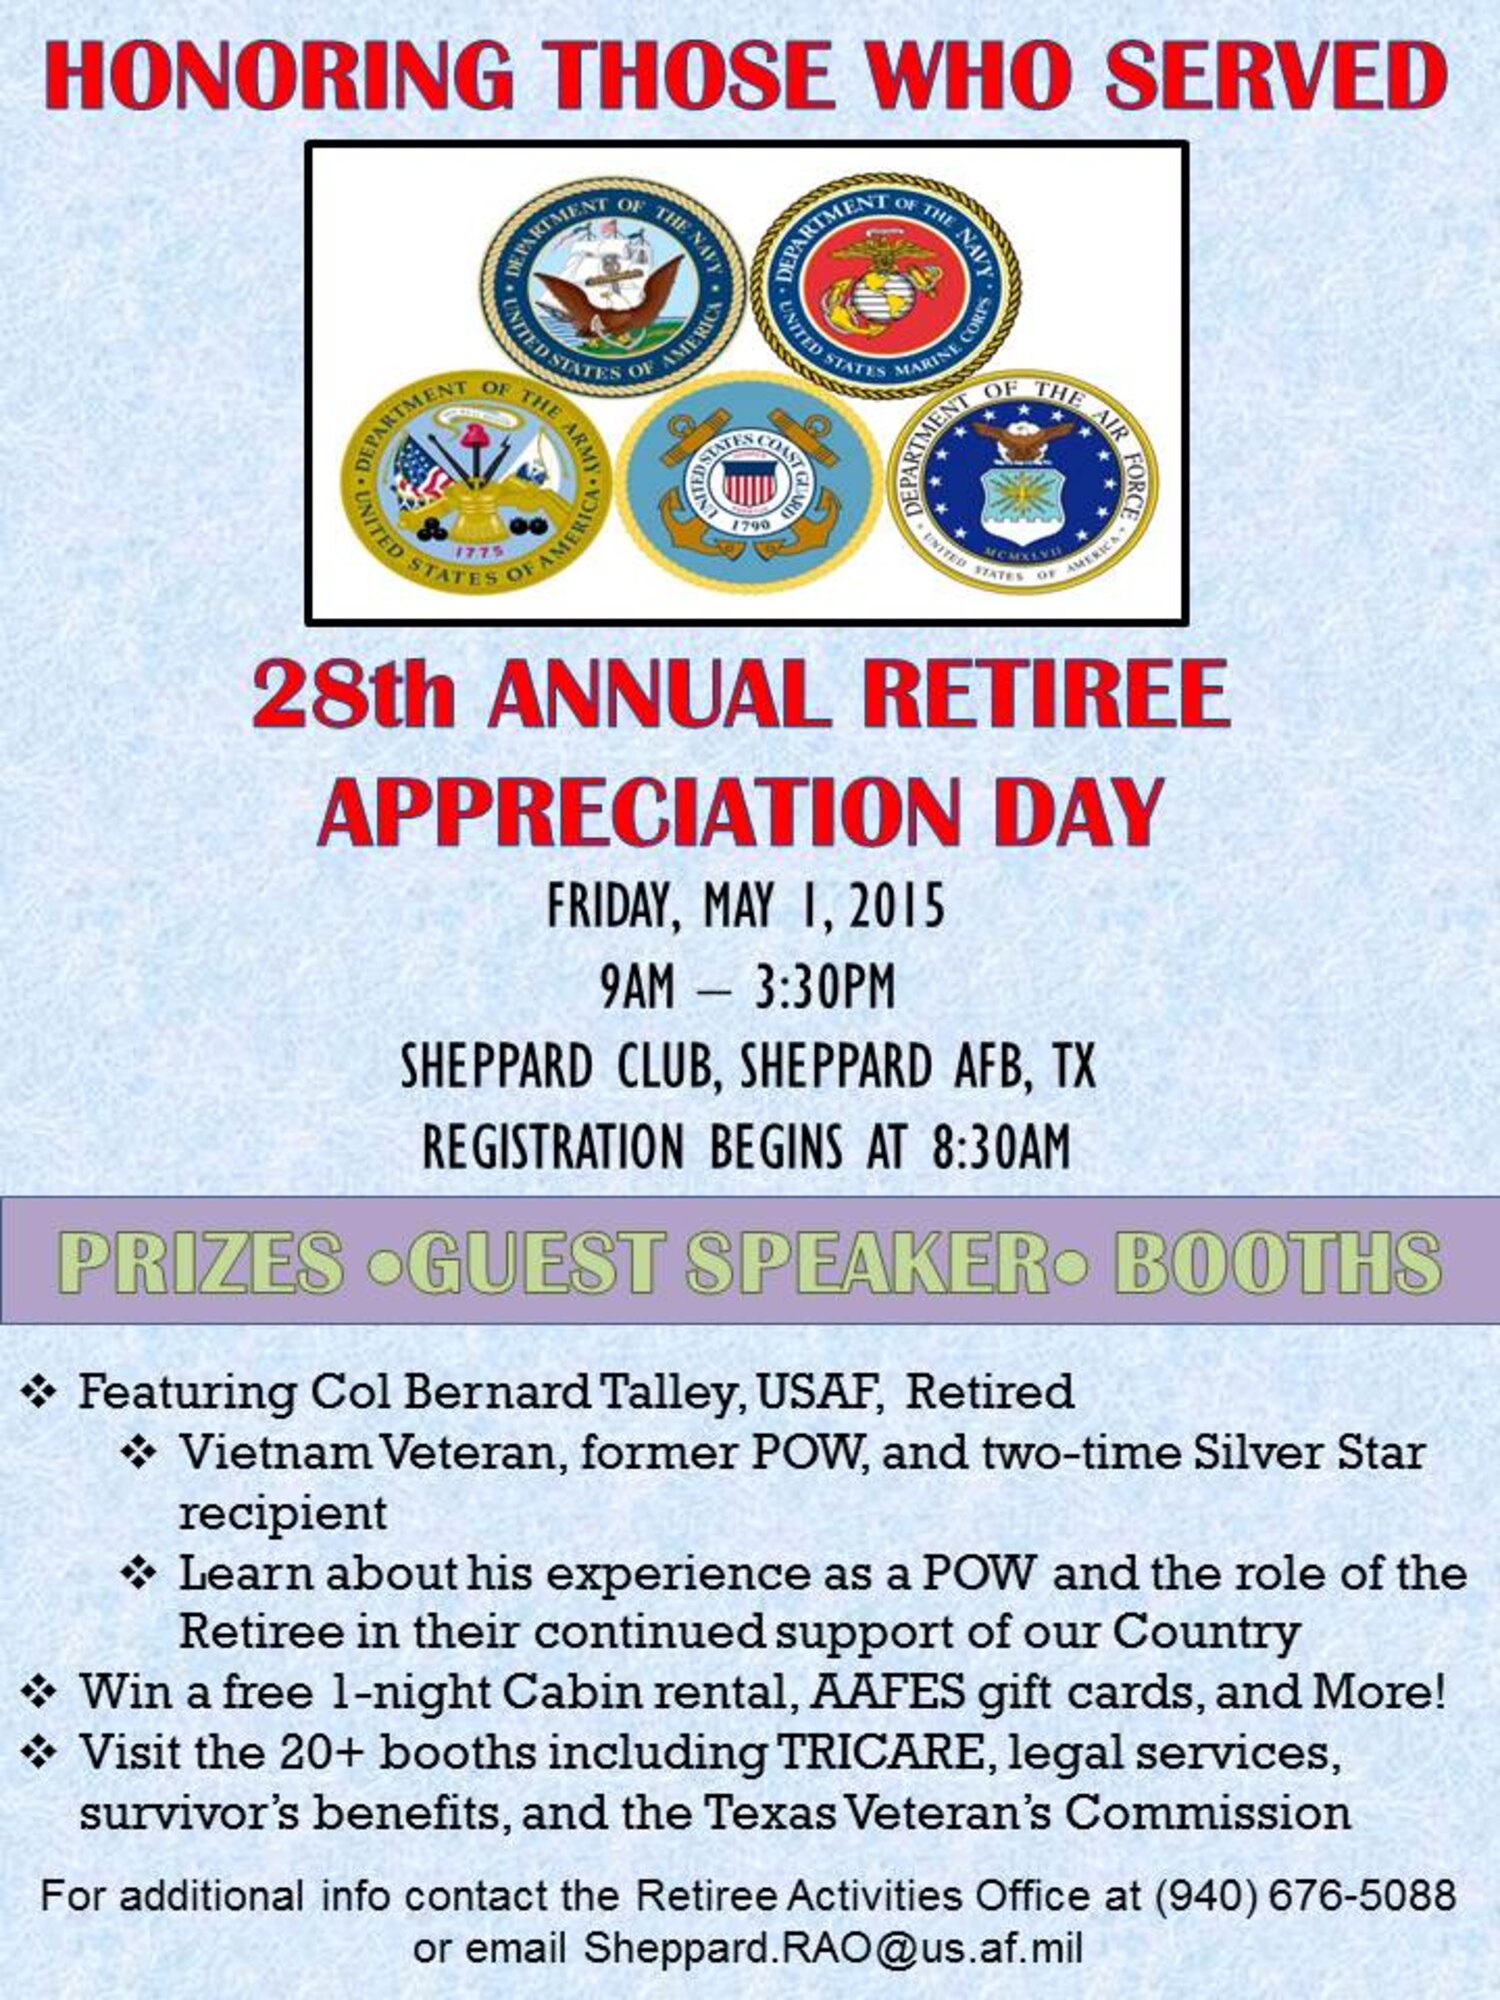 Sheppard Air Force Base, Texas will hold its 28th Annual Retiree Appreciation Day May 1, 2015 at the Sheppard Club from 9:00 a.m. until 3:30 p.m. 